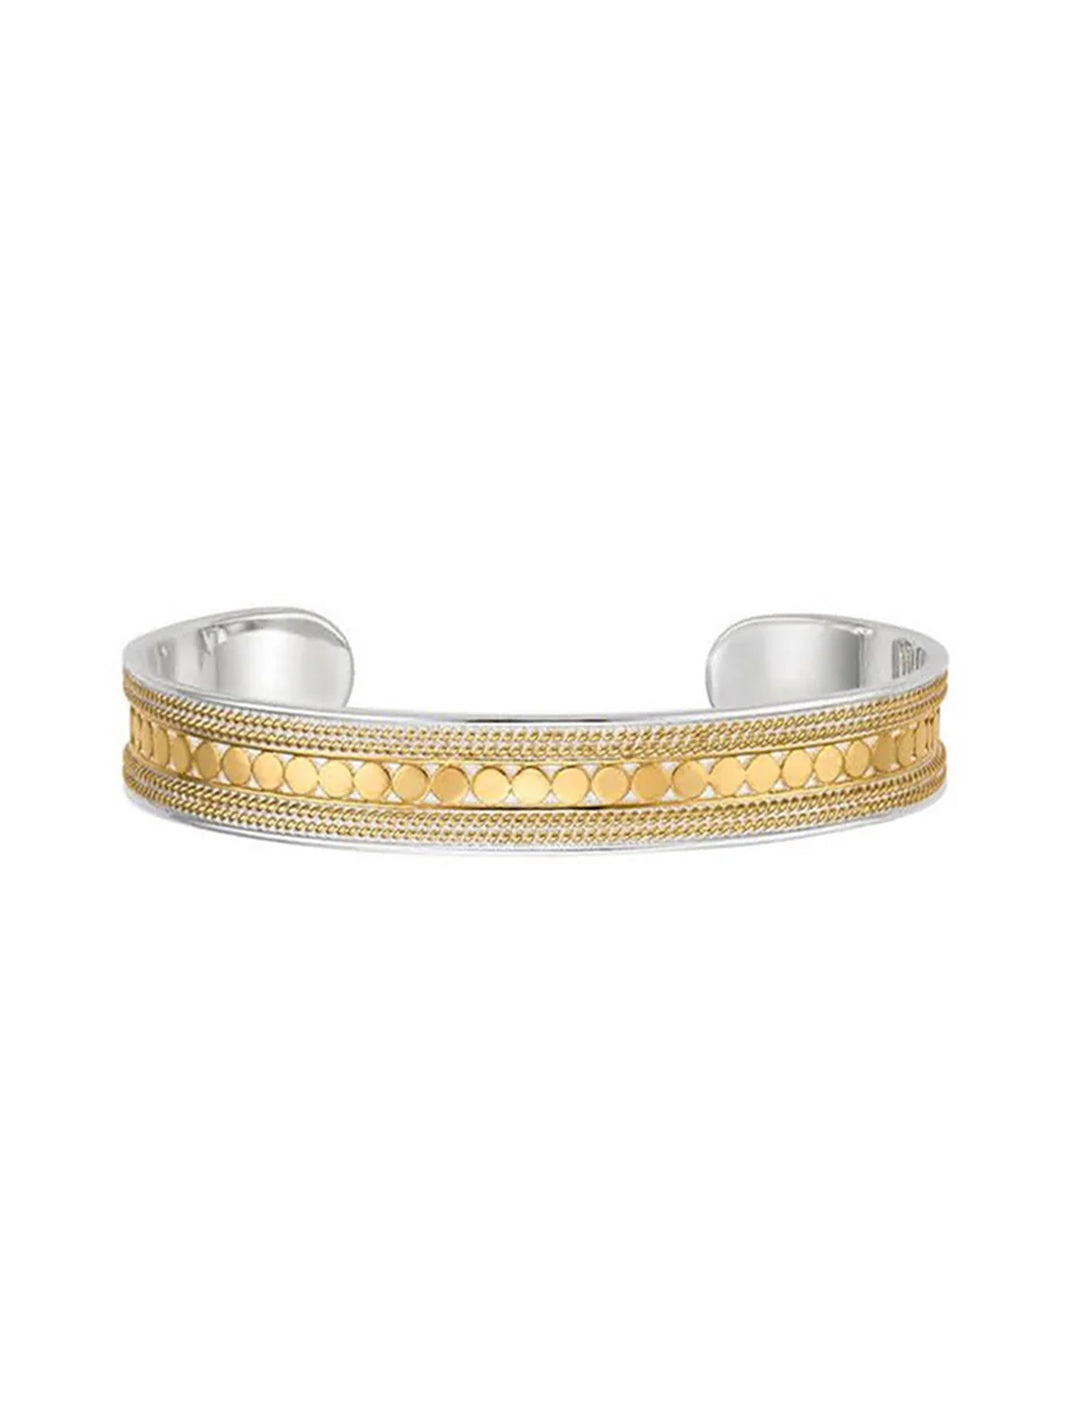 Front view of Anna Beck's classic cuff in gold.